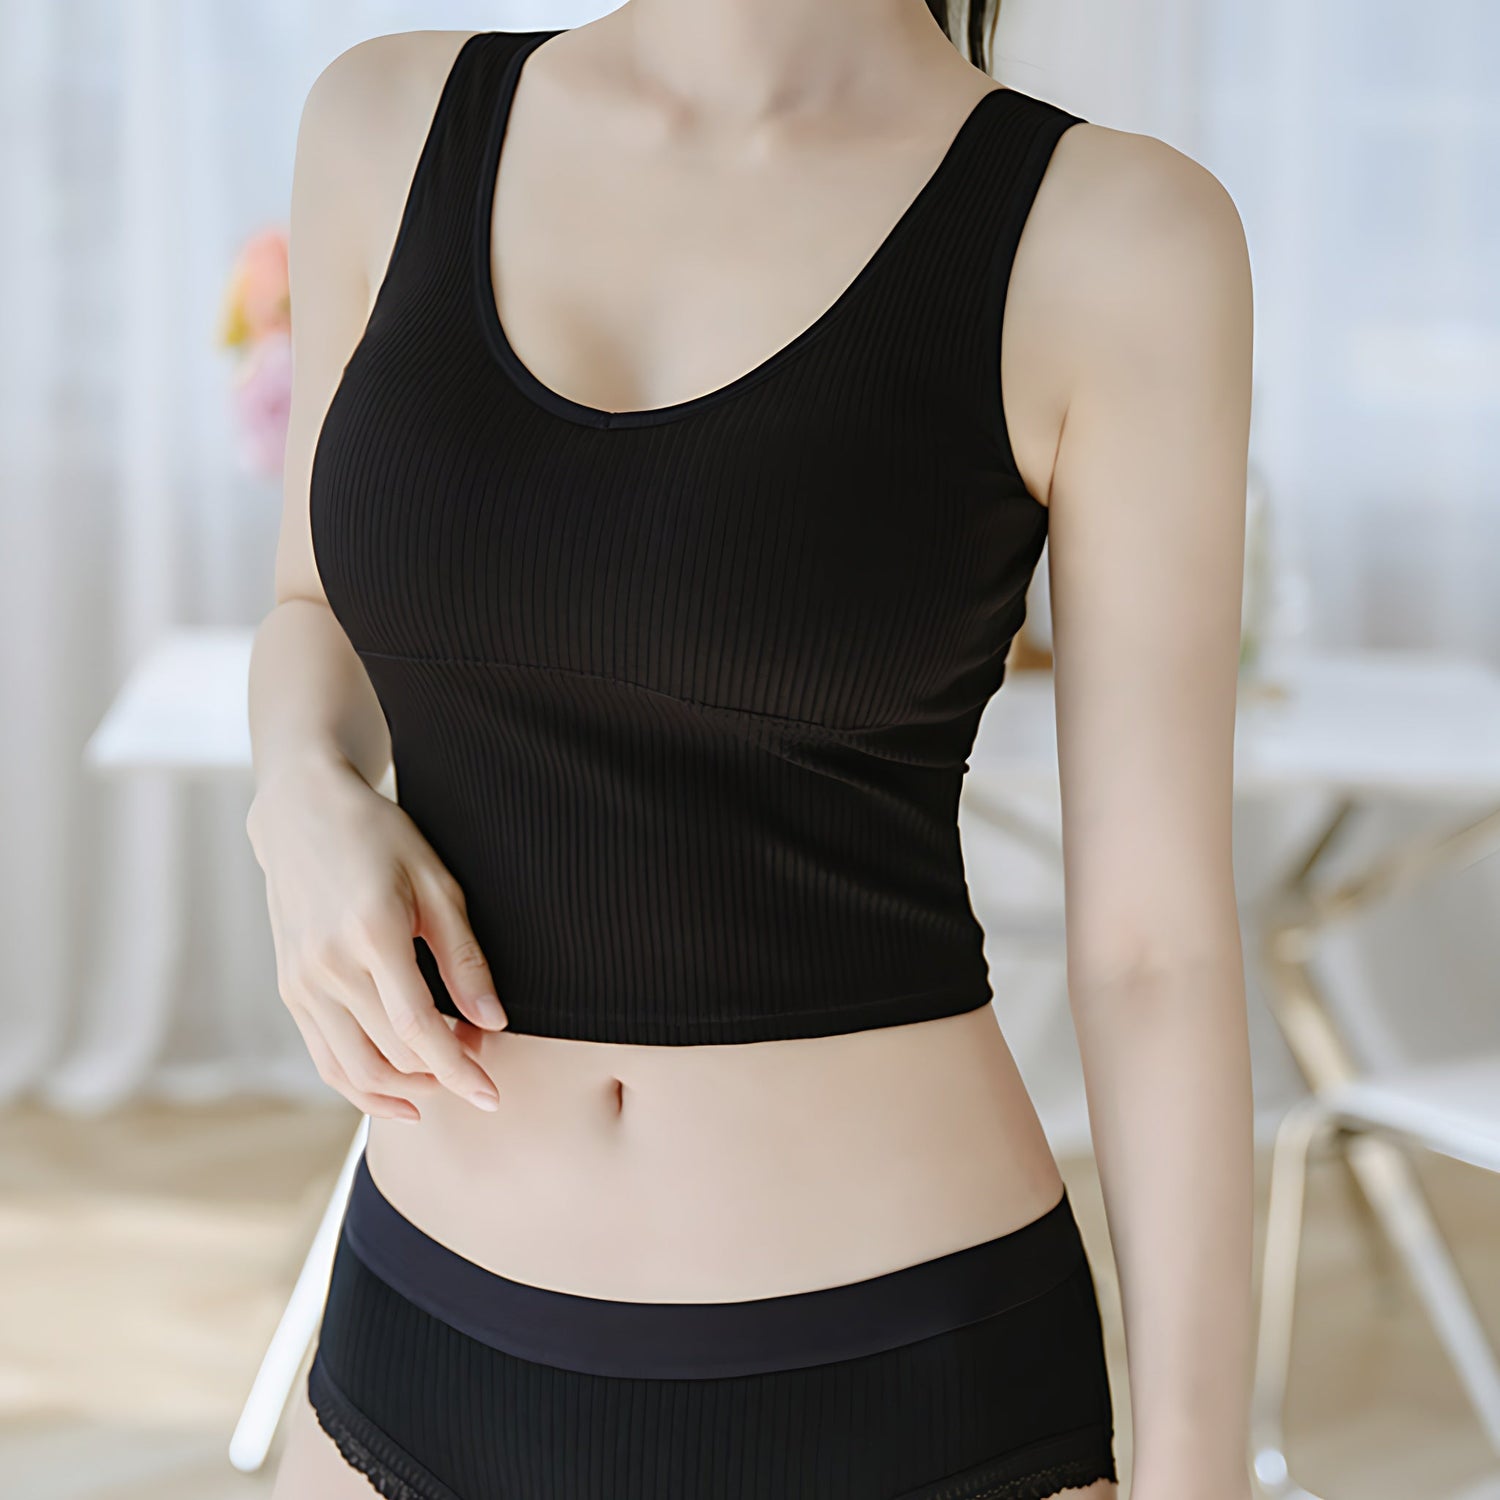 Trendy Korean Dongdaemun Women's Underwear: Stylish and Comfortable Intimate Apparel Directly Sourced from Korea for Everyday Confidence.